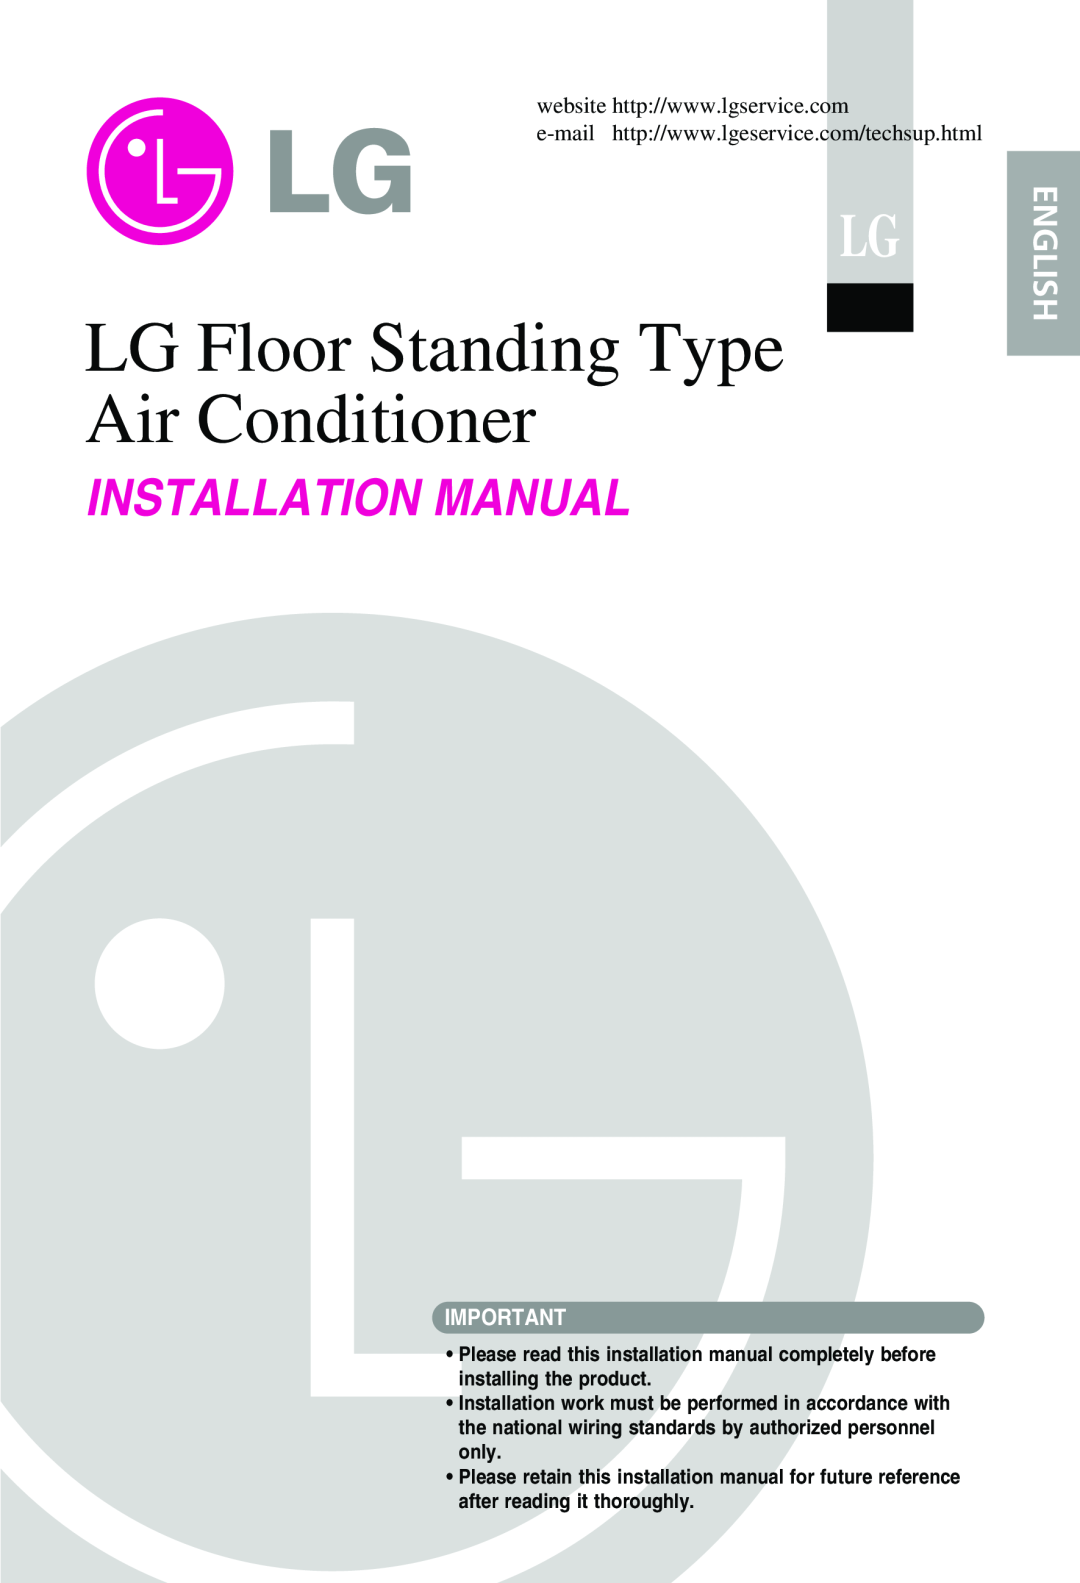 LG Electronics 3828A20025U manual English, LG Floor Standing Type Air Conditioner, Installation Manual 